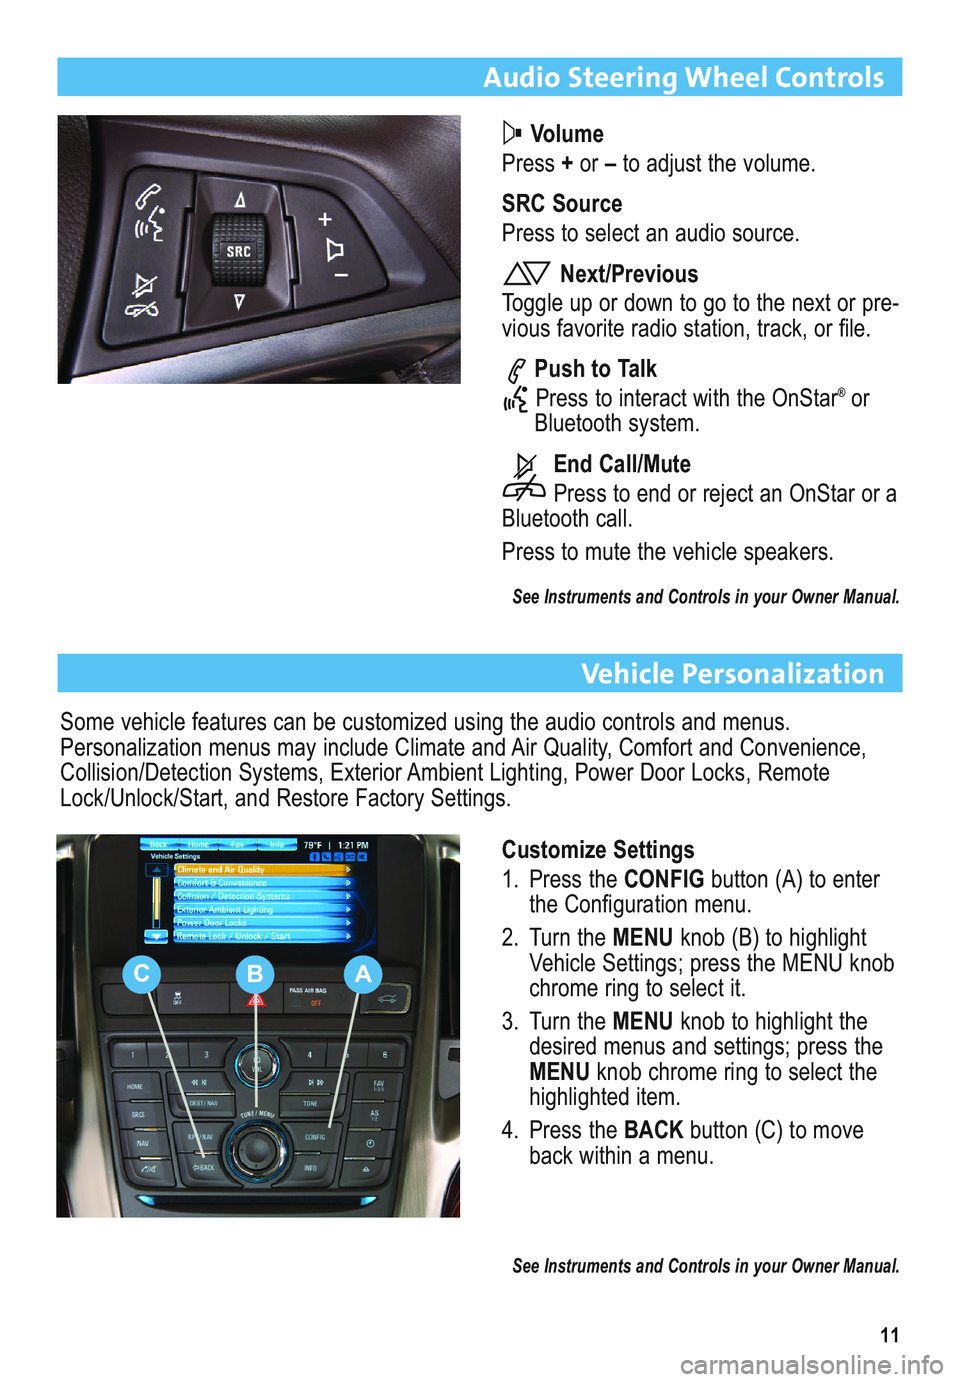 BUICK VERANO 2012  Get To Know Guide 11
Audio Steering Wheel Controls
Volume
Press +or –to adjust the volume.
SRC Source
Press to select an audio source.
Next/Previous
Toggle up or down to go to the next or pre-
vious favorite radio st